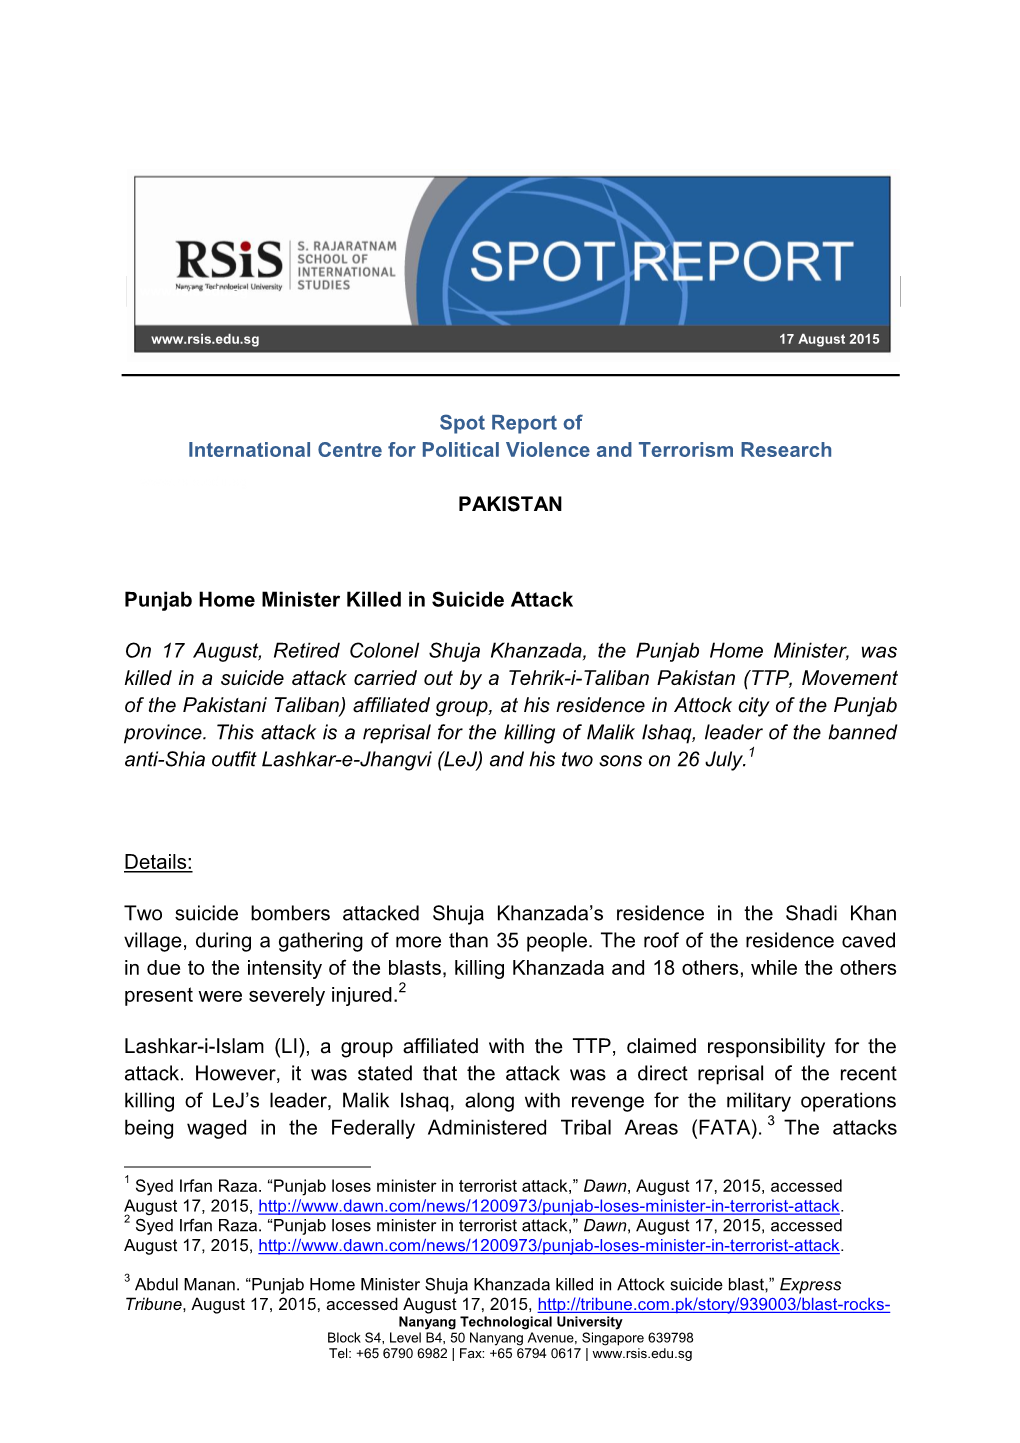 Spot Report of International Centre for Political Violence and Terrorism Research PAKISTAN